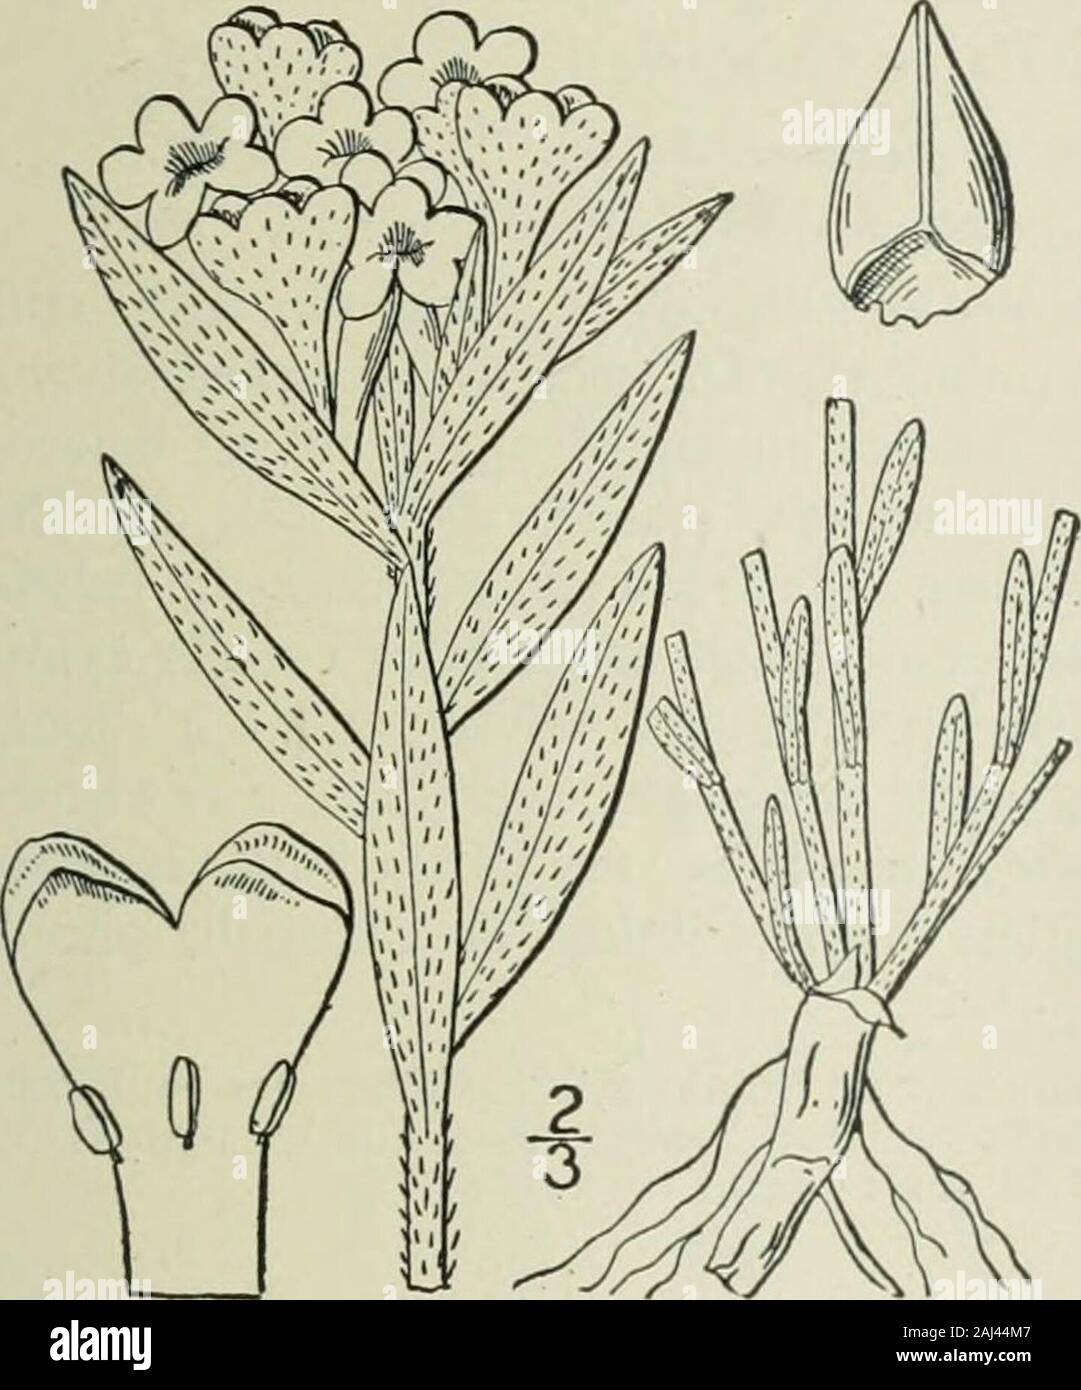 An illustrated flora of the northern United States, Canada and the British possessions : from Newfoundland to the parallel of the southern boundary of Virginia and from the Atlantic Ocean westward to the 102nd meridian . earifolium Goldie. Narrow-leaved Puccoon. Fig. 3541- L. angustifolium Michx. Fl. Bor. Am. i: 130. 1803. Not Forsk.L. linearifolium Goldie, Edinb. Phil. Journ. 1822 : Z22. Perennial by a deep root, strigose-pubescent andscabrous; stem branched, 6-2° high, the brancheserect or ascending. Leaves linear, sessile, acuteor acutish, ¥-2 long, ih.-2l wide; flowers oftwo kinds, in term Stock Photo